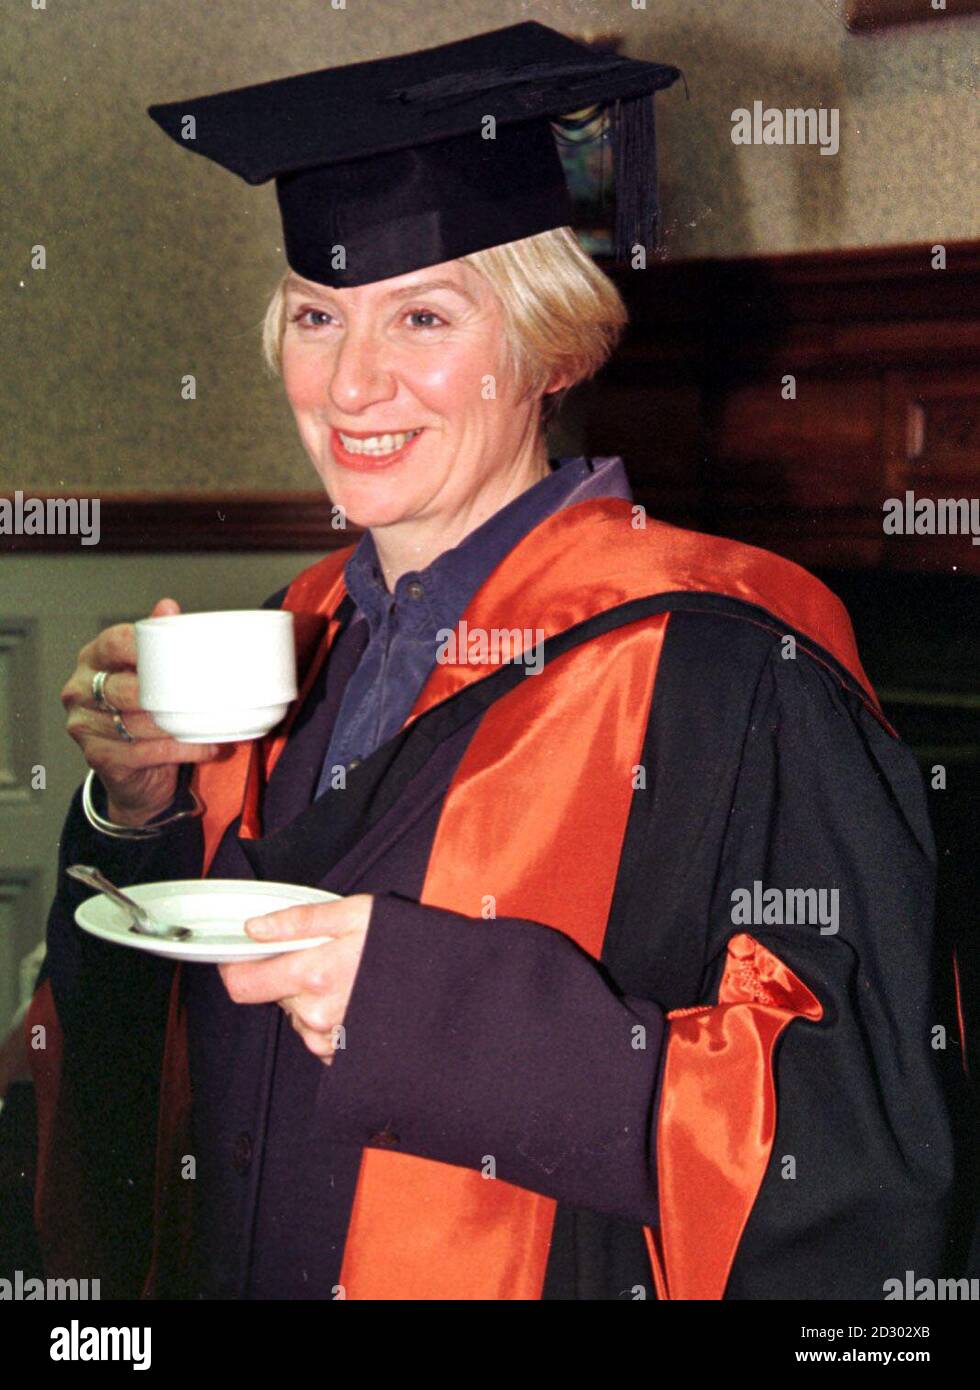 From domestic science to Master of Science, Victoria Wood receives a honorary Master of Science dergree from UMIST, the science, engineering and management University in Manchester. Photo by Dave Kendall/PA. Stock Photo